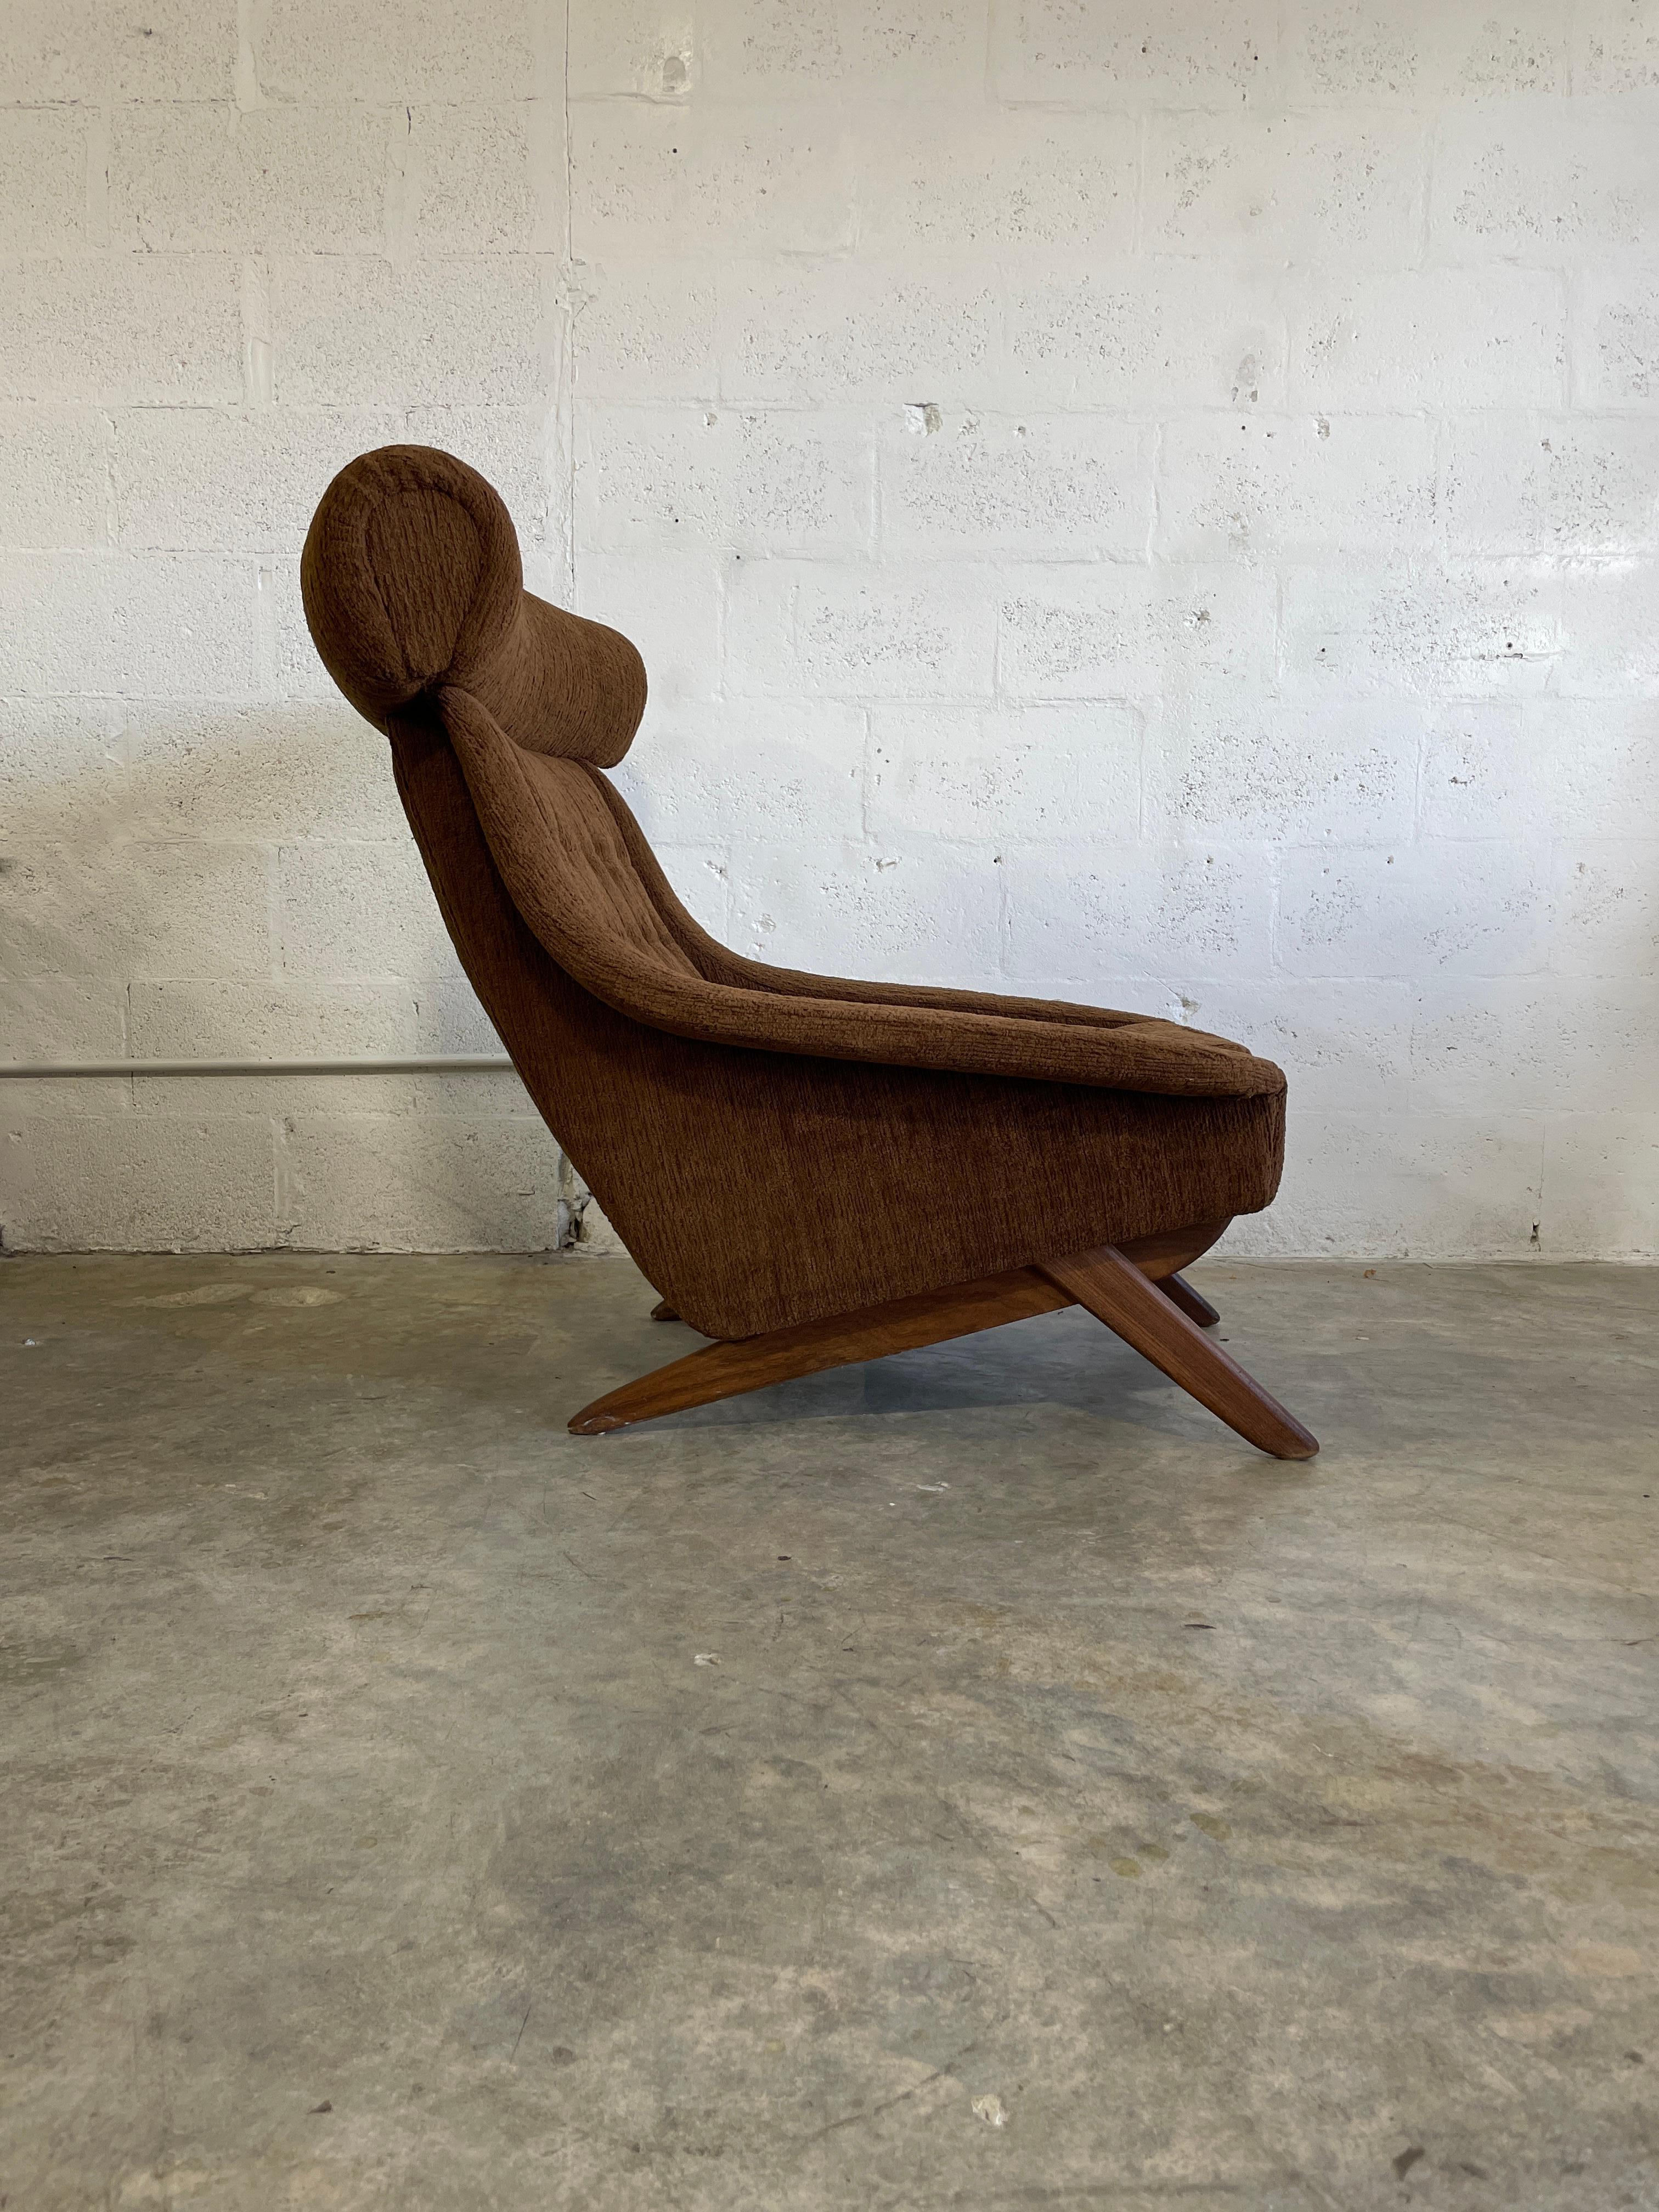 Illum Wikkelso Ox Lounge Highback Chair Danish Mid Century Modern In Good Condition For Sale In Fort Lauderdale, FL